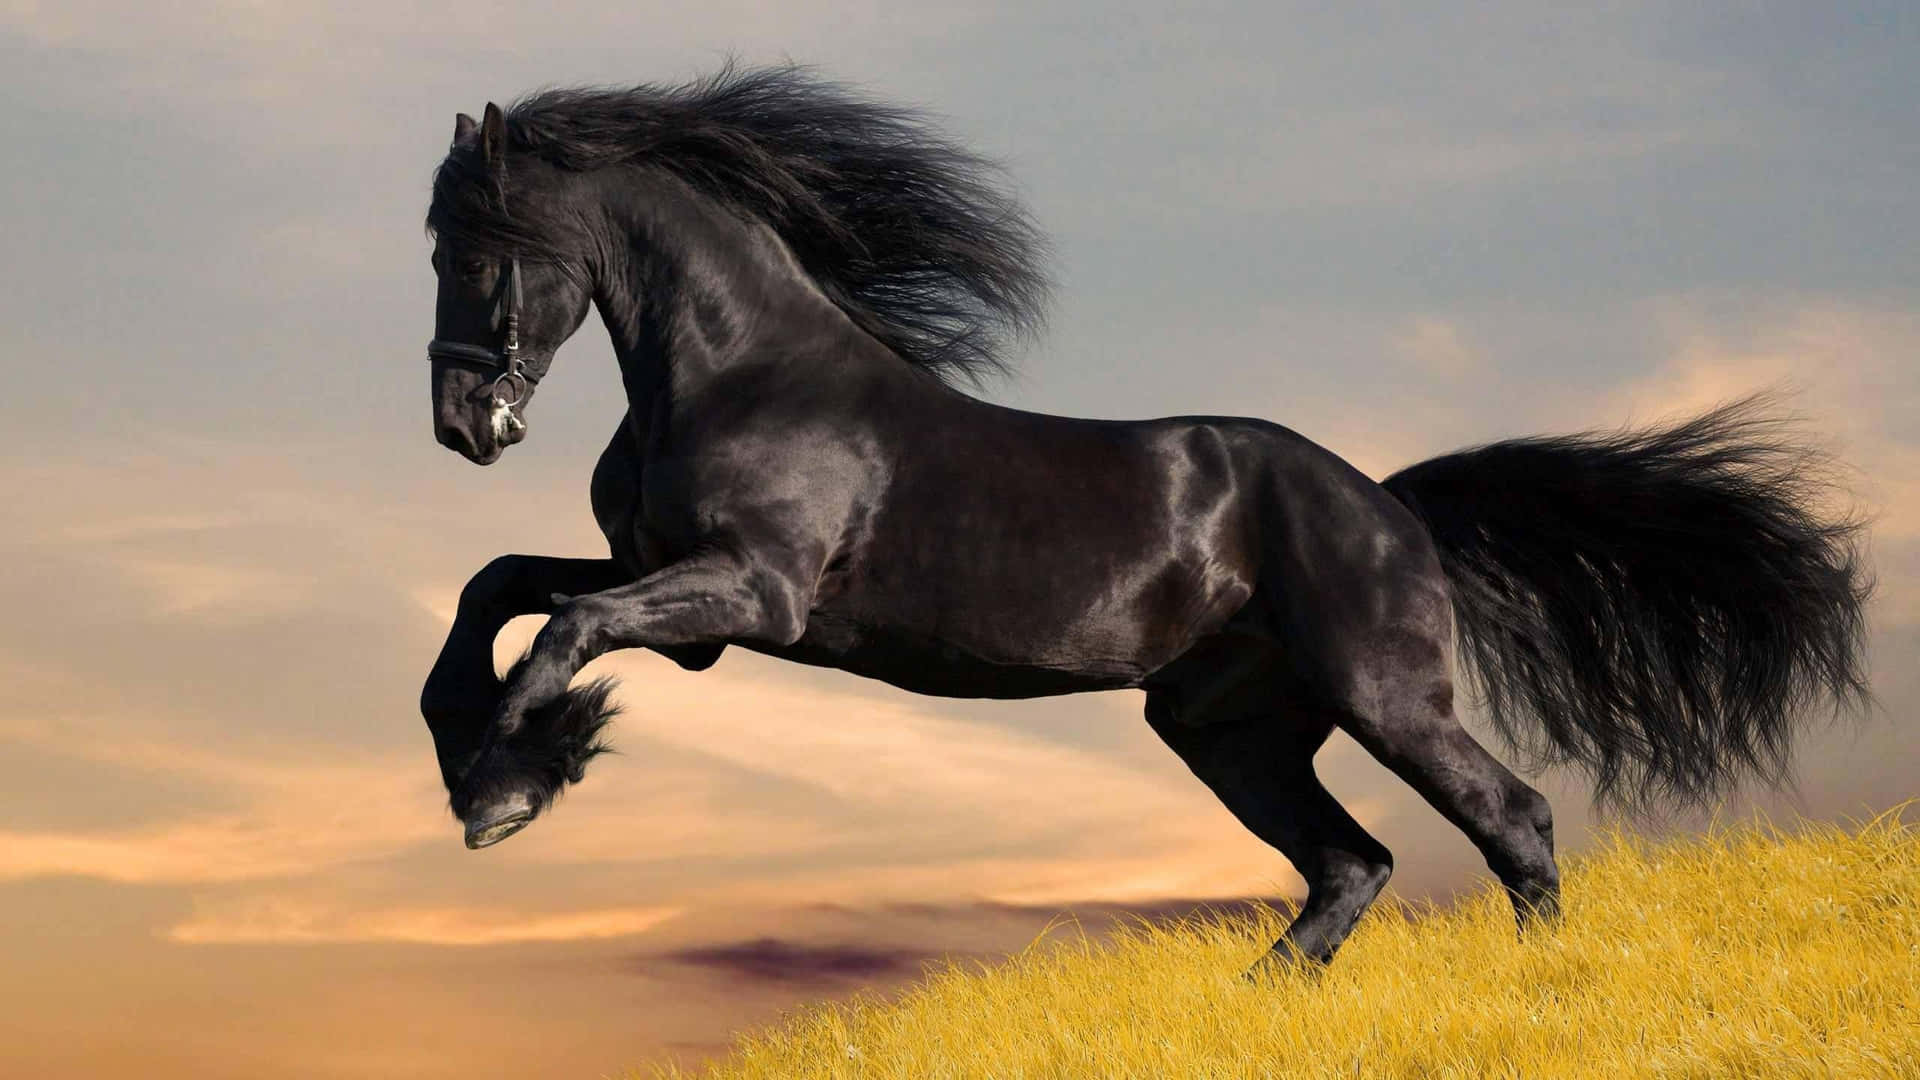 A wild and beautiful cool horse in the wilderness Wallpaper